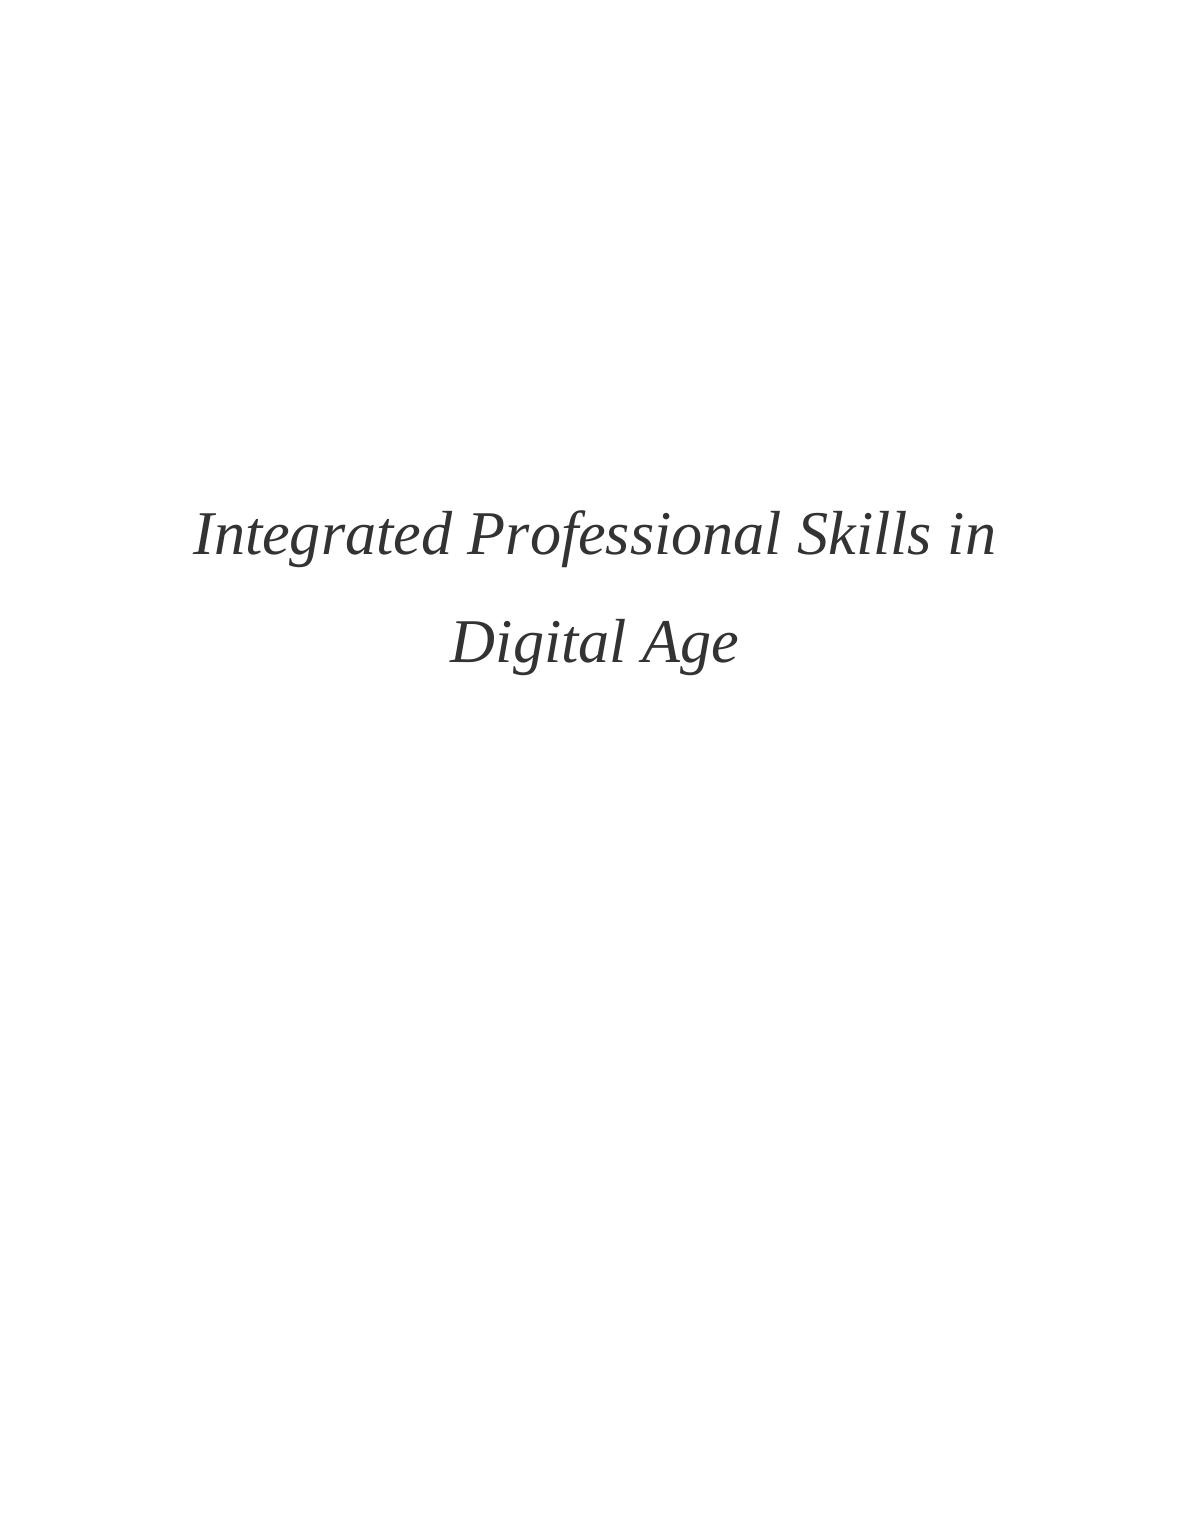 Integrated Professional Skills in Digital Age (Doc)_1